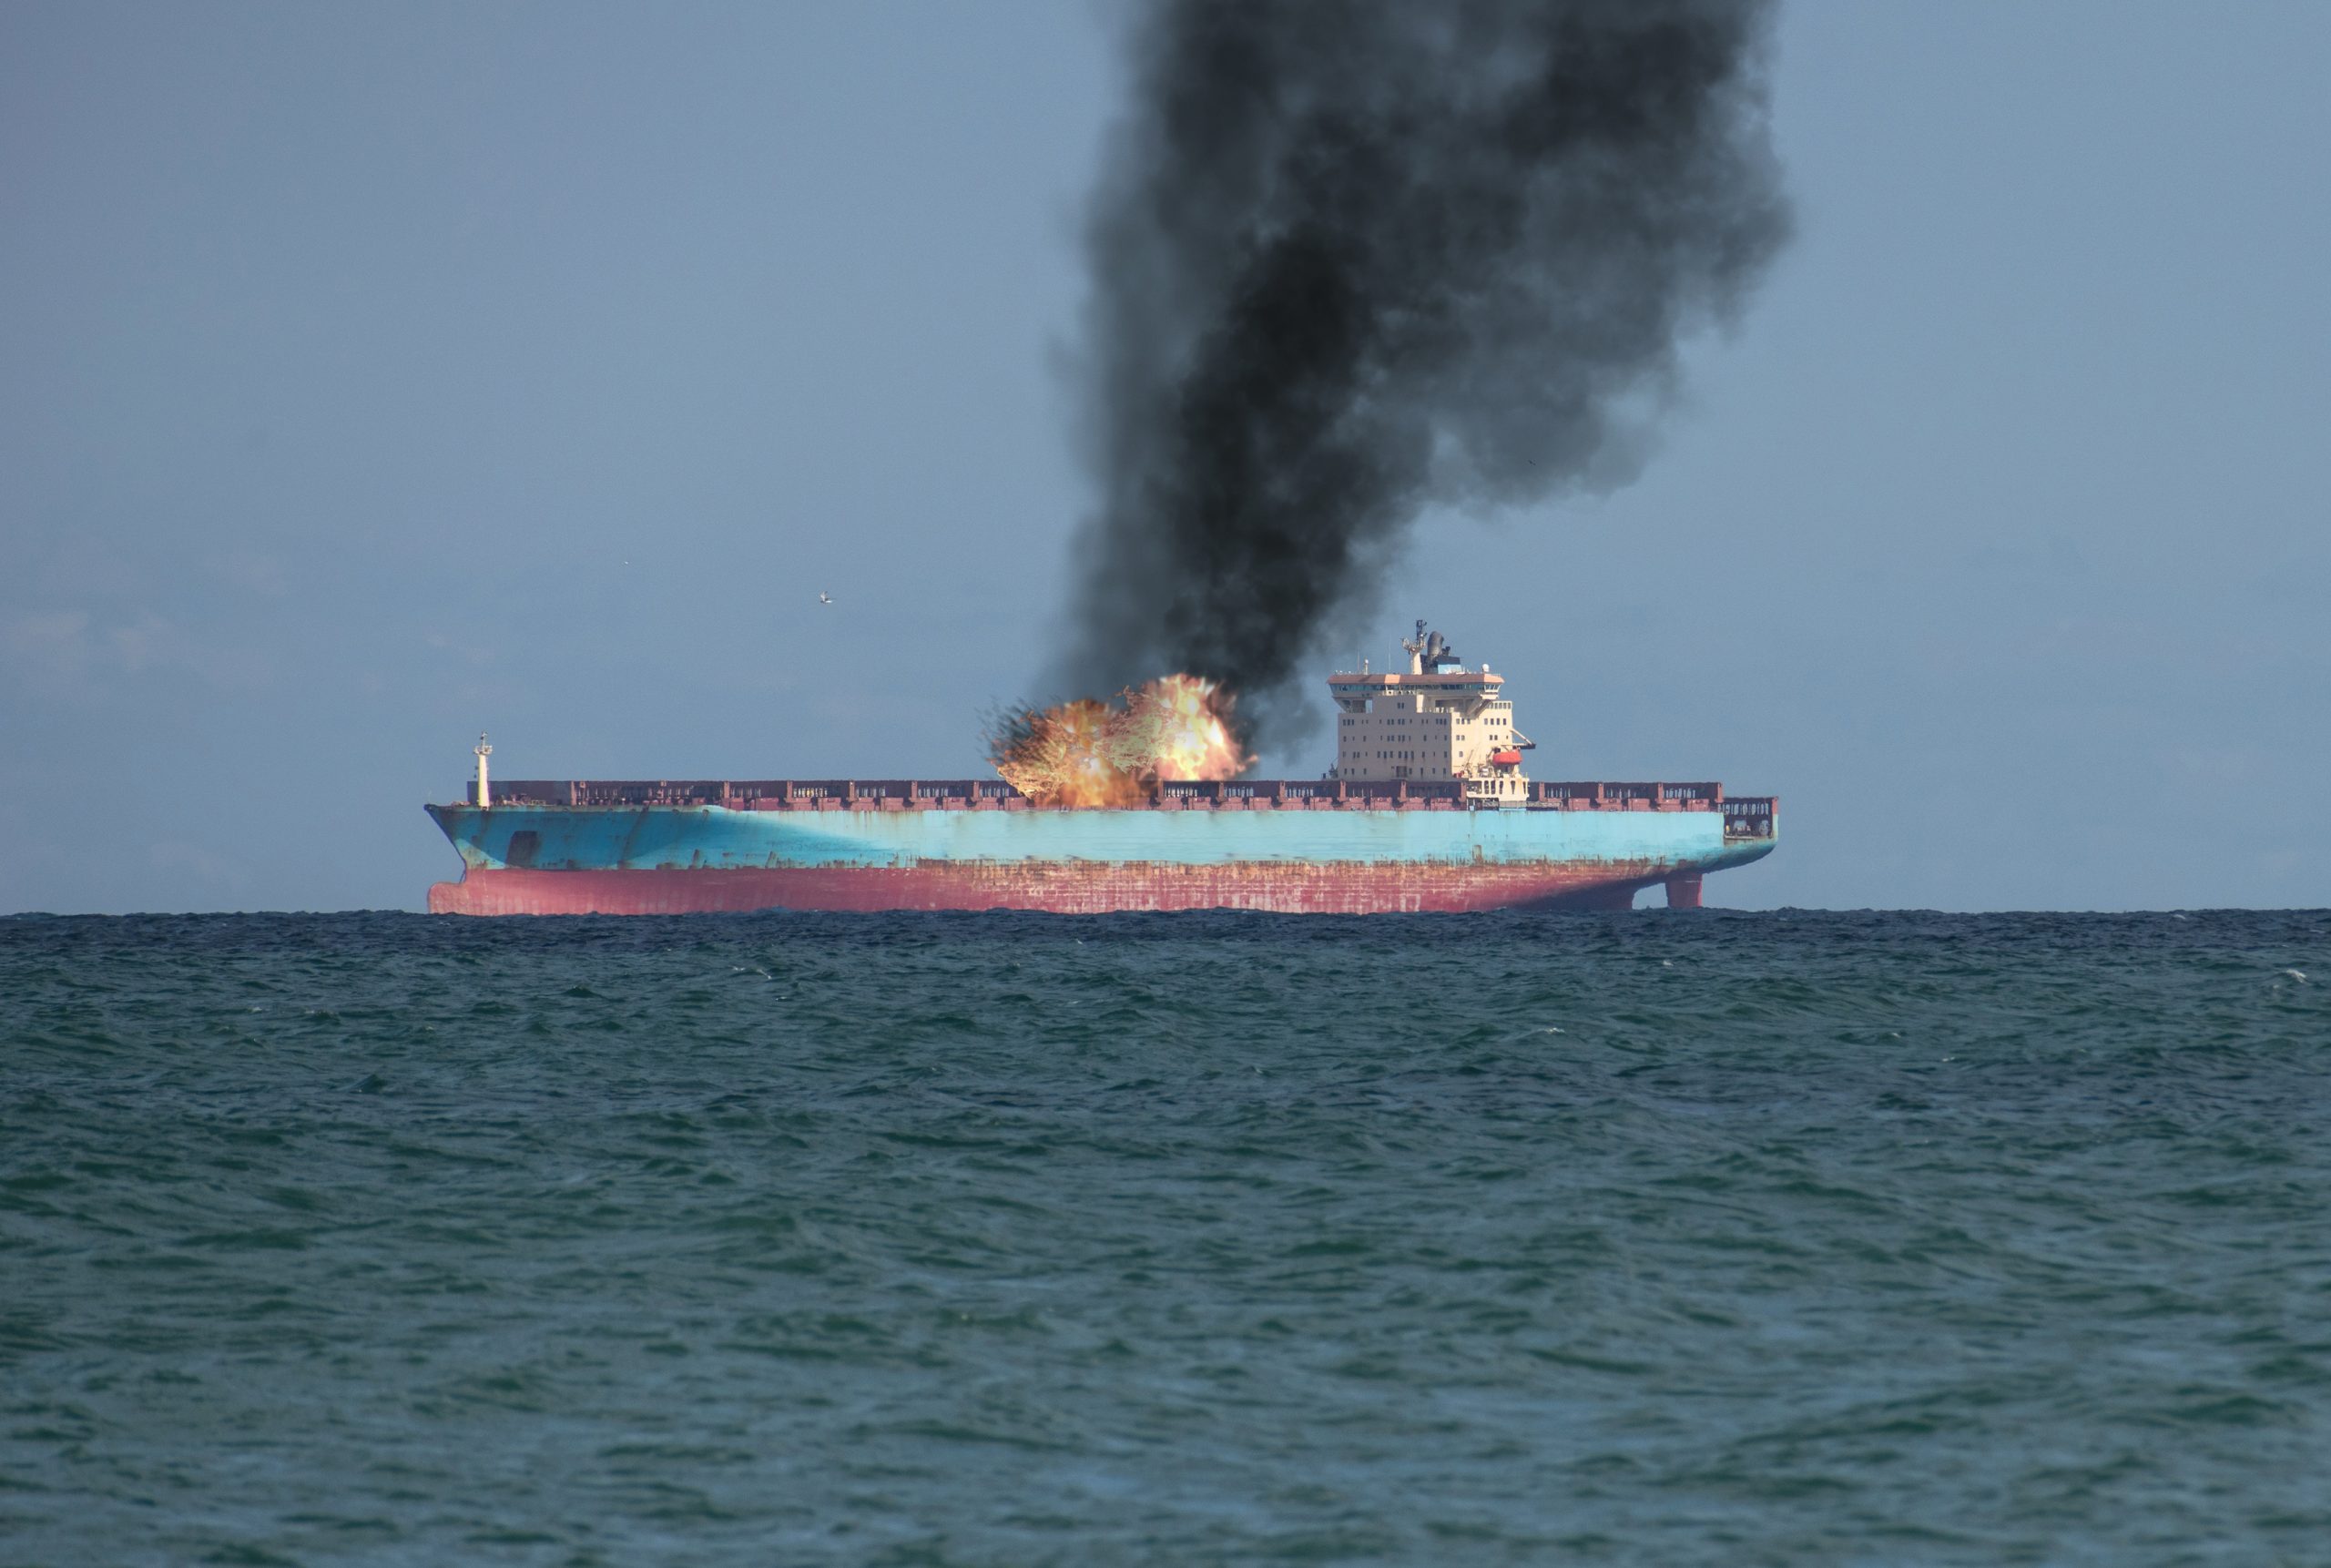 Cargo fires onboard vessels a burning issue